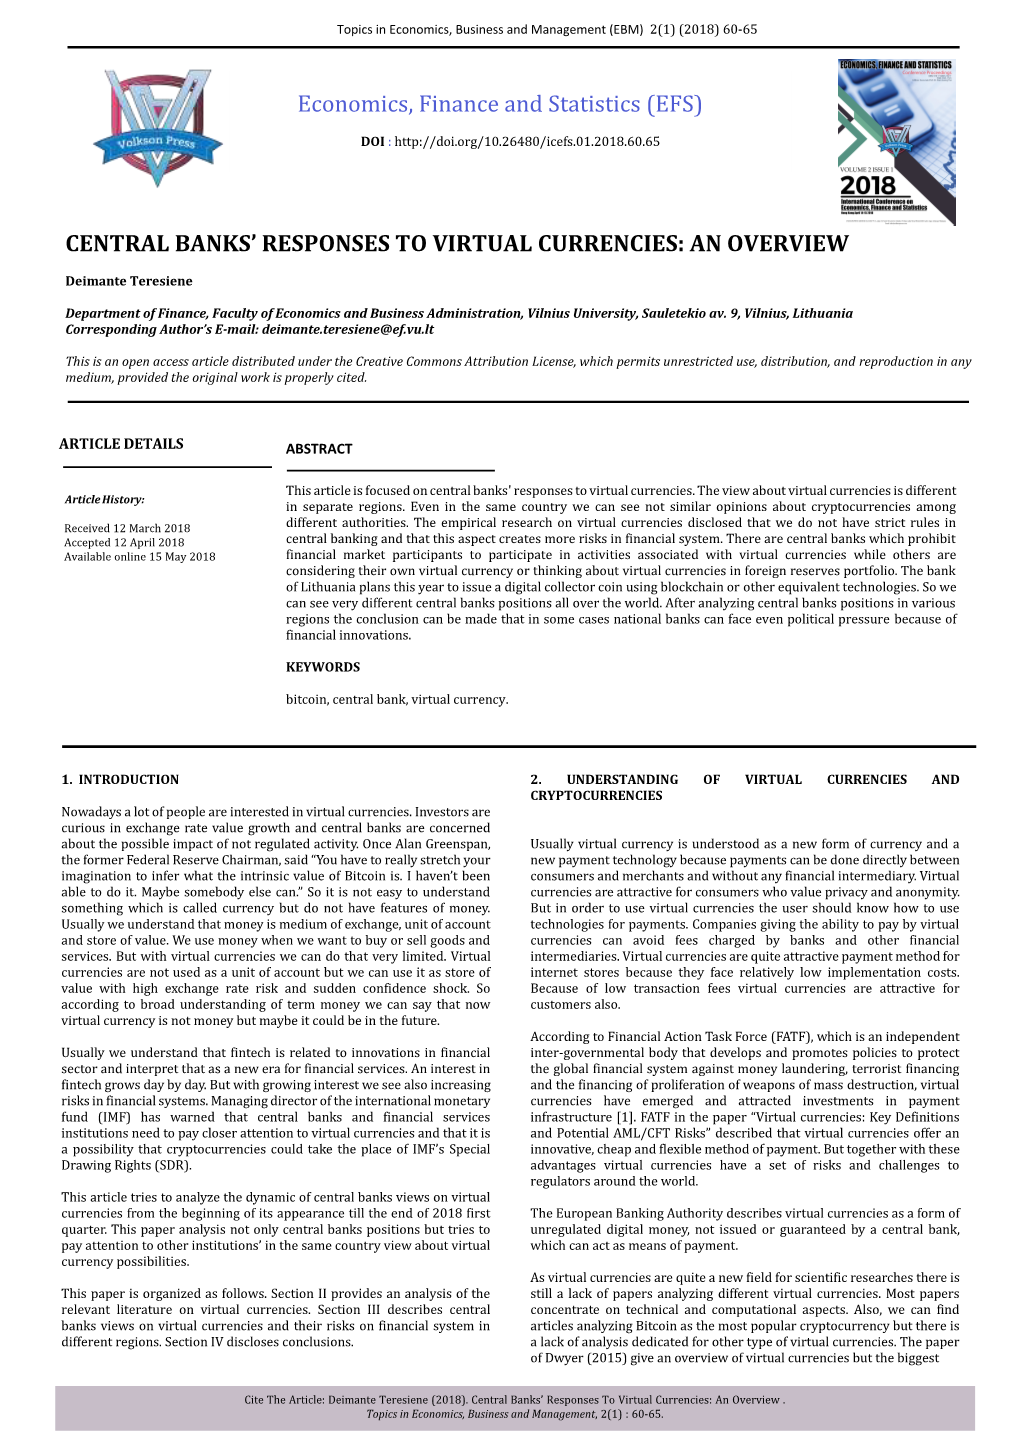 (Efs) Central Banks' Responses to Virtual Currencies